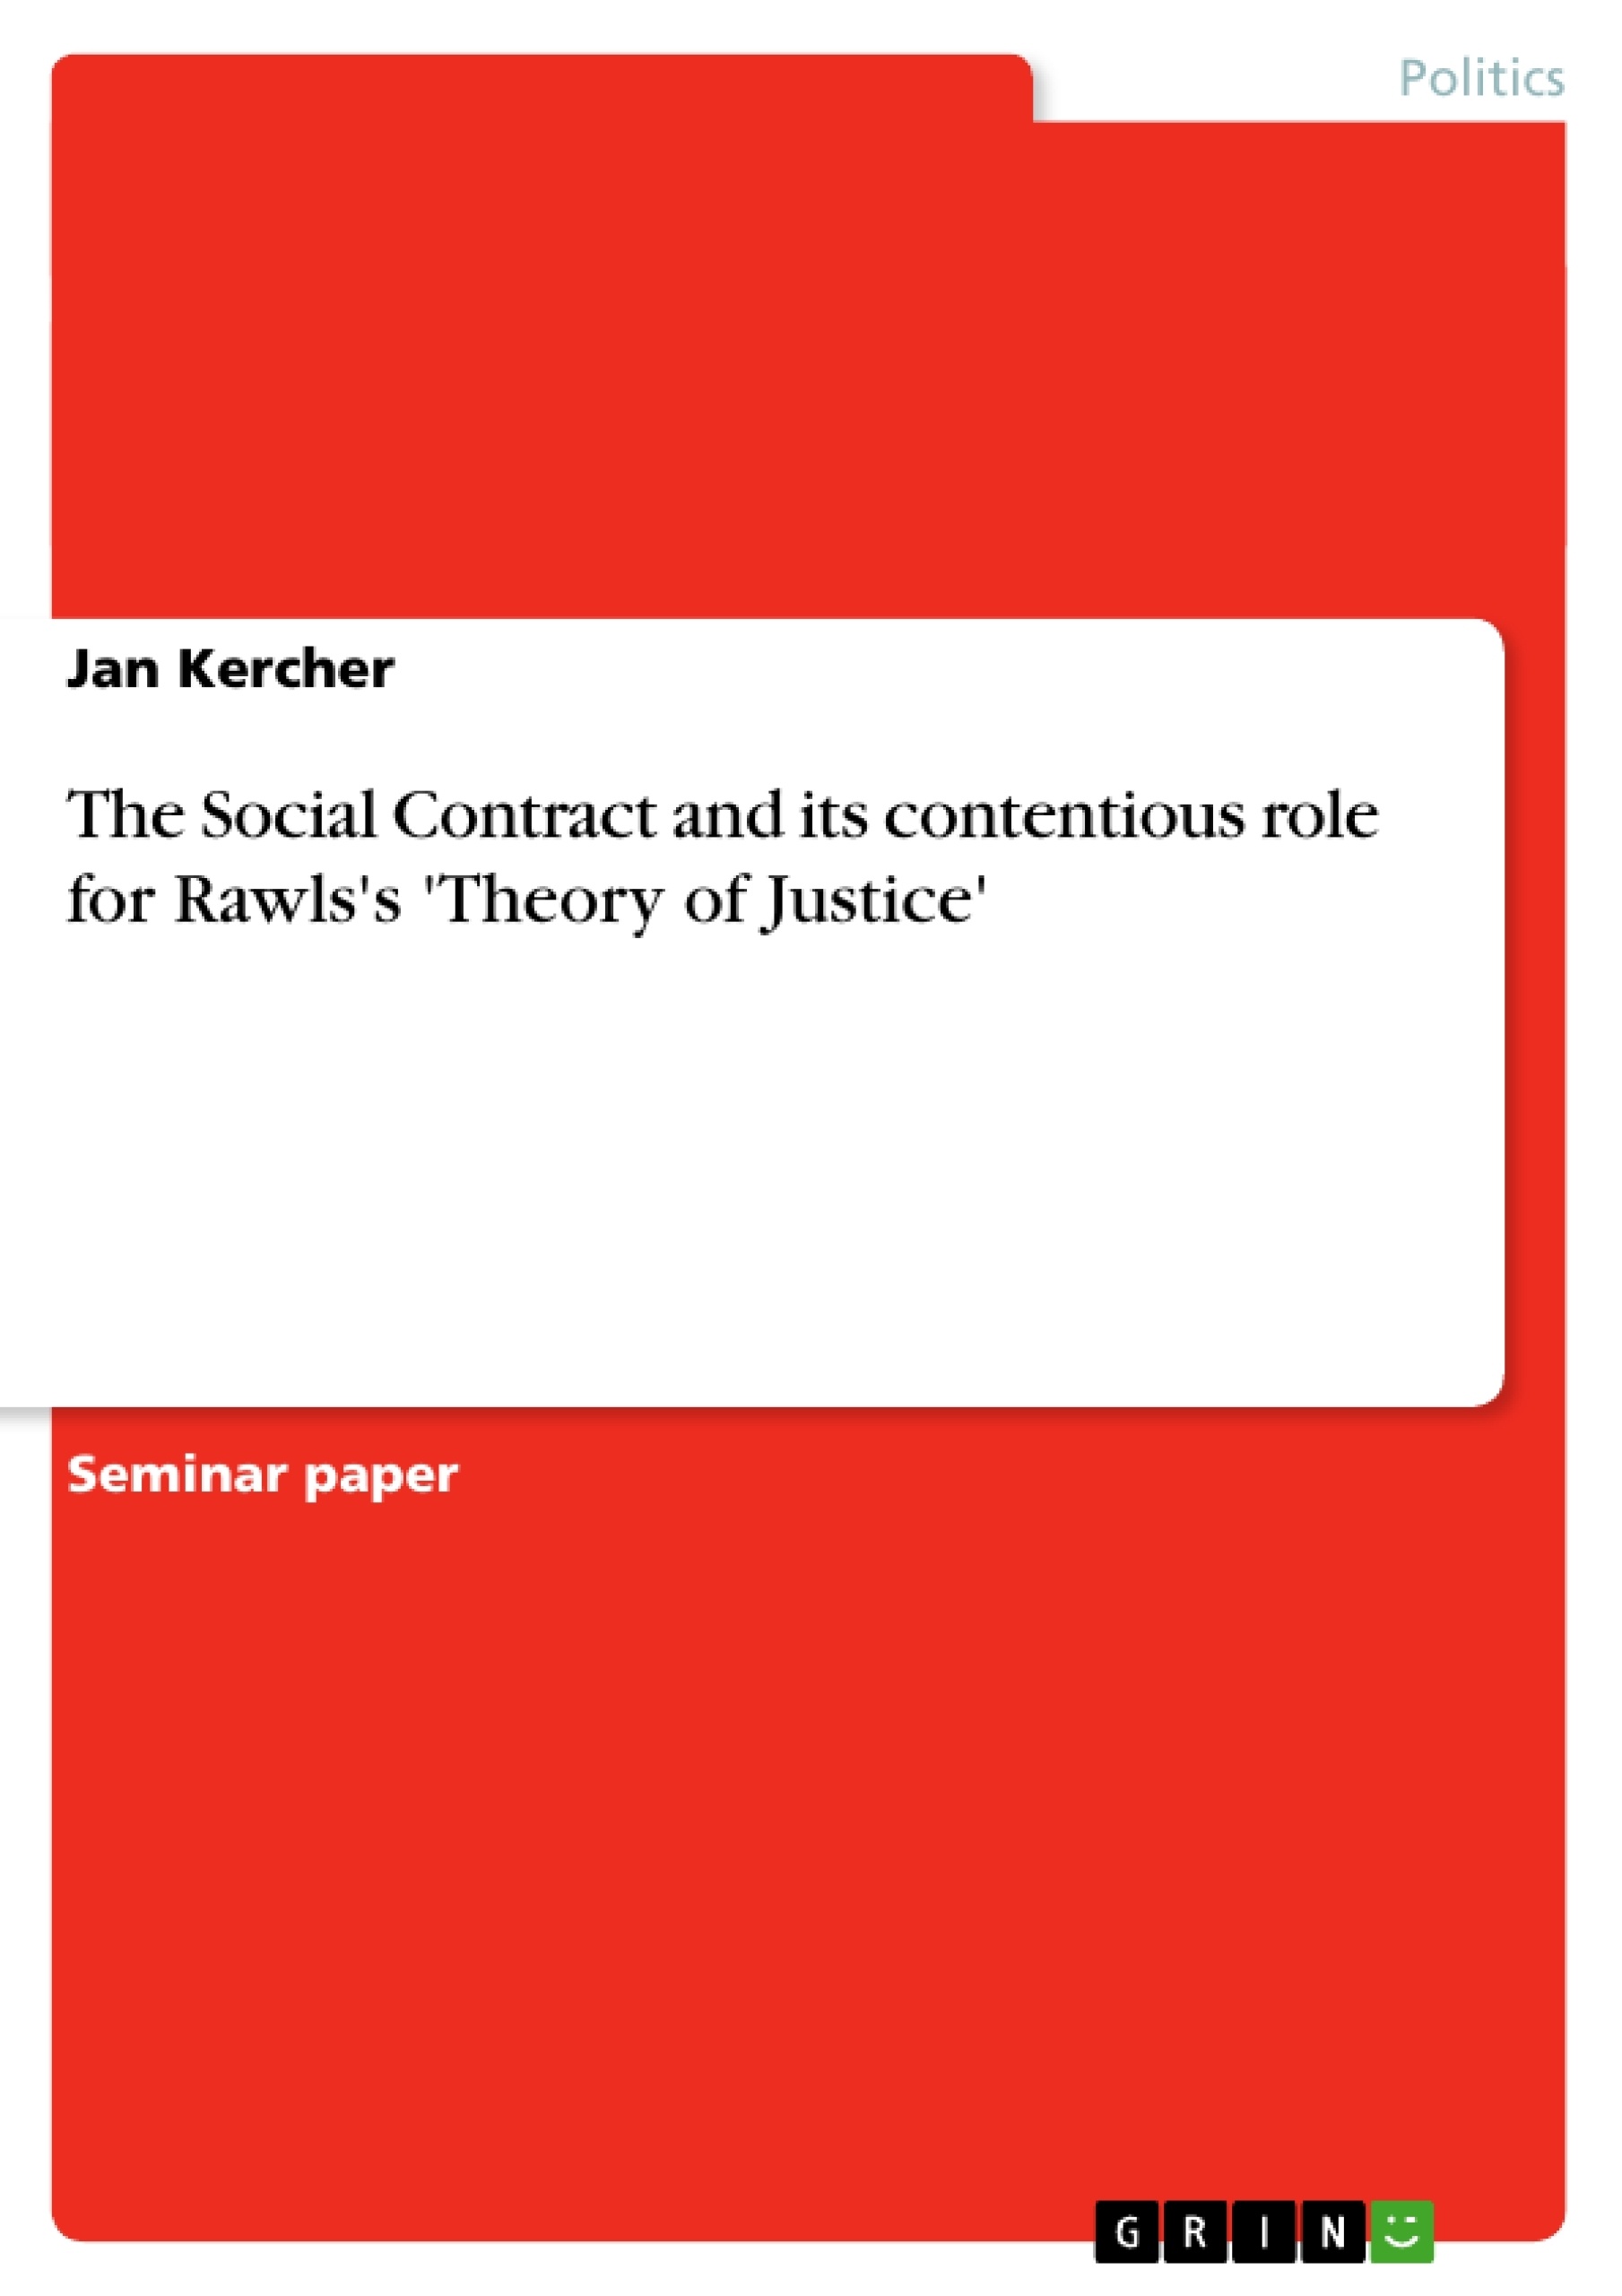 Titel: The Social Contract and its contentious role for Rawls's 'Theory of Justice'